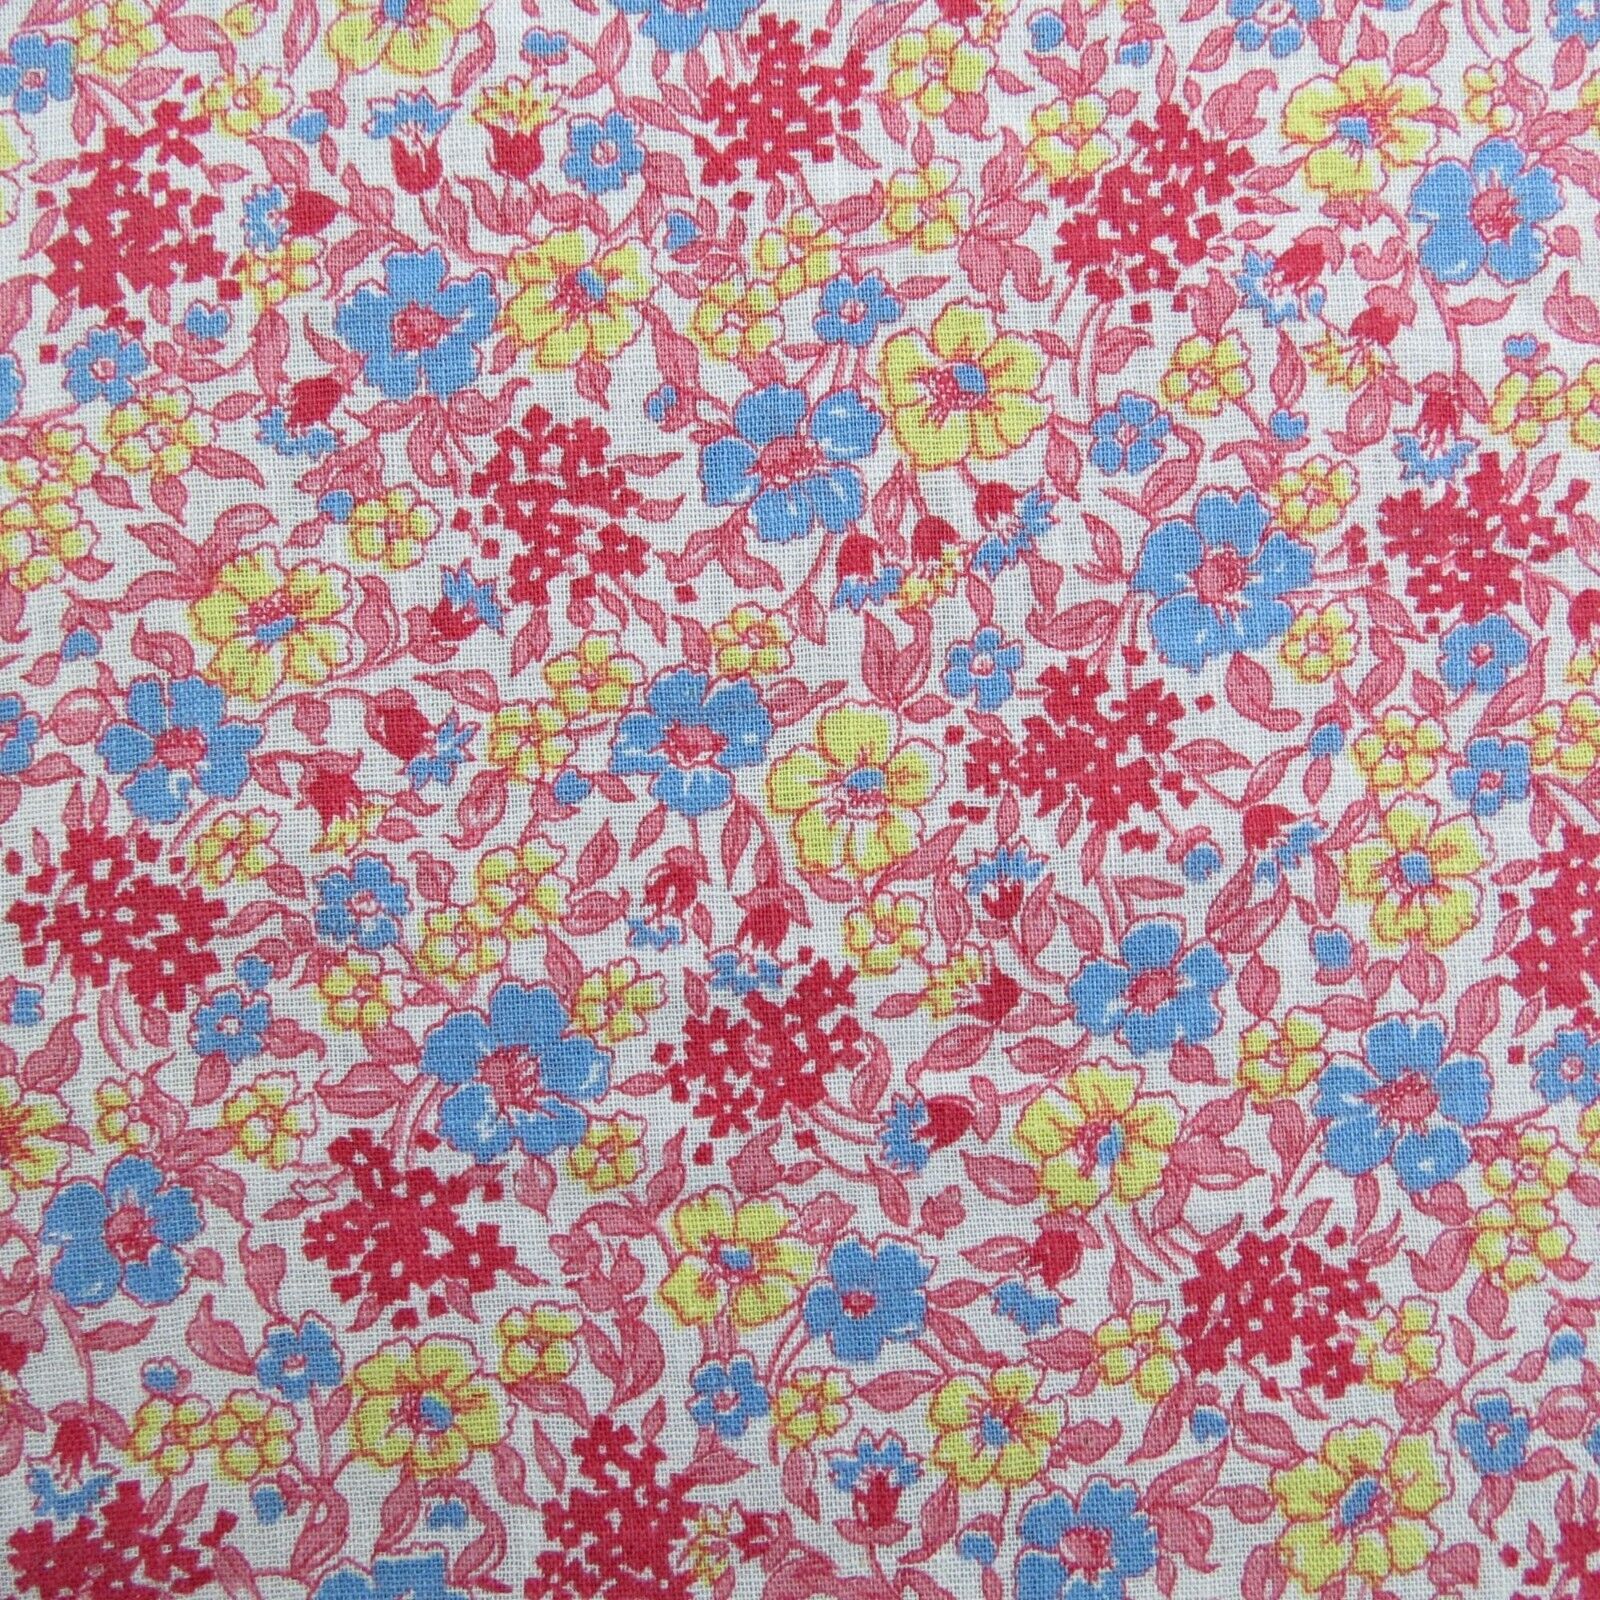 VINTAGE Red Yellow Blue Floral Lightweight Gauze Cotton Fabric 3pc approx 7.5yd